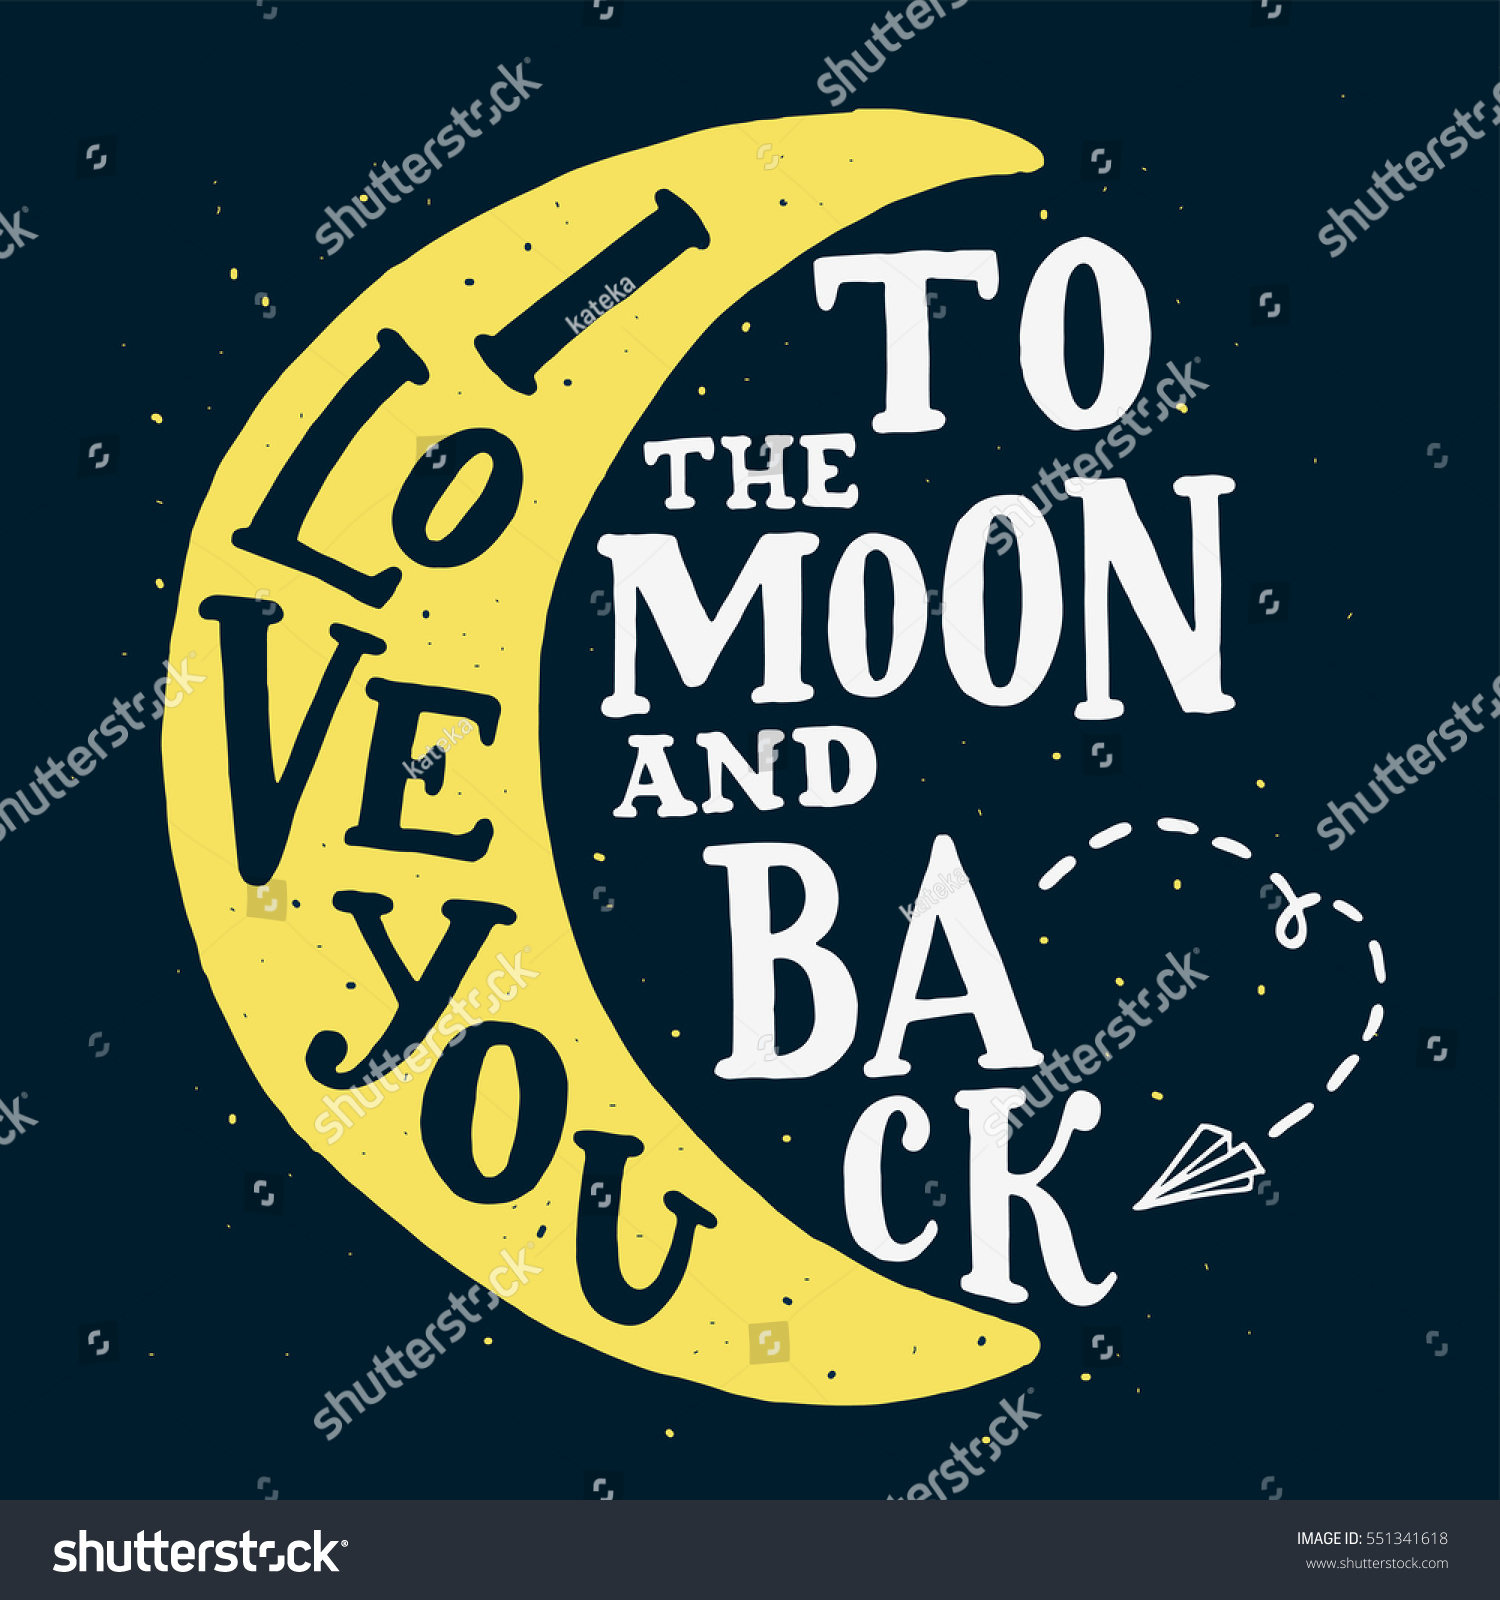 I love you to the moon and back Hand drawn quote with the moon